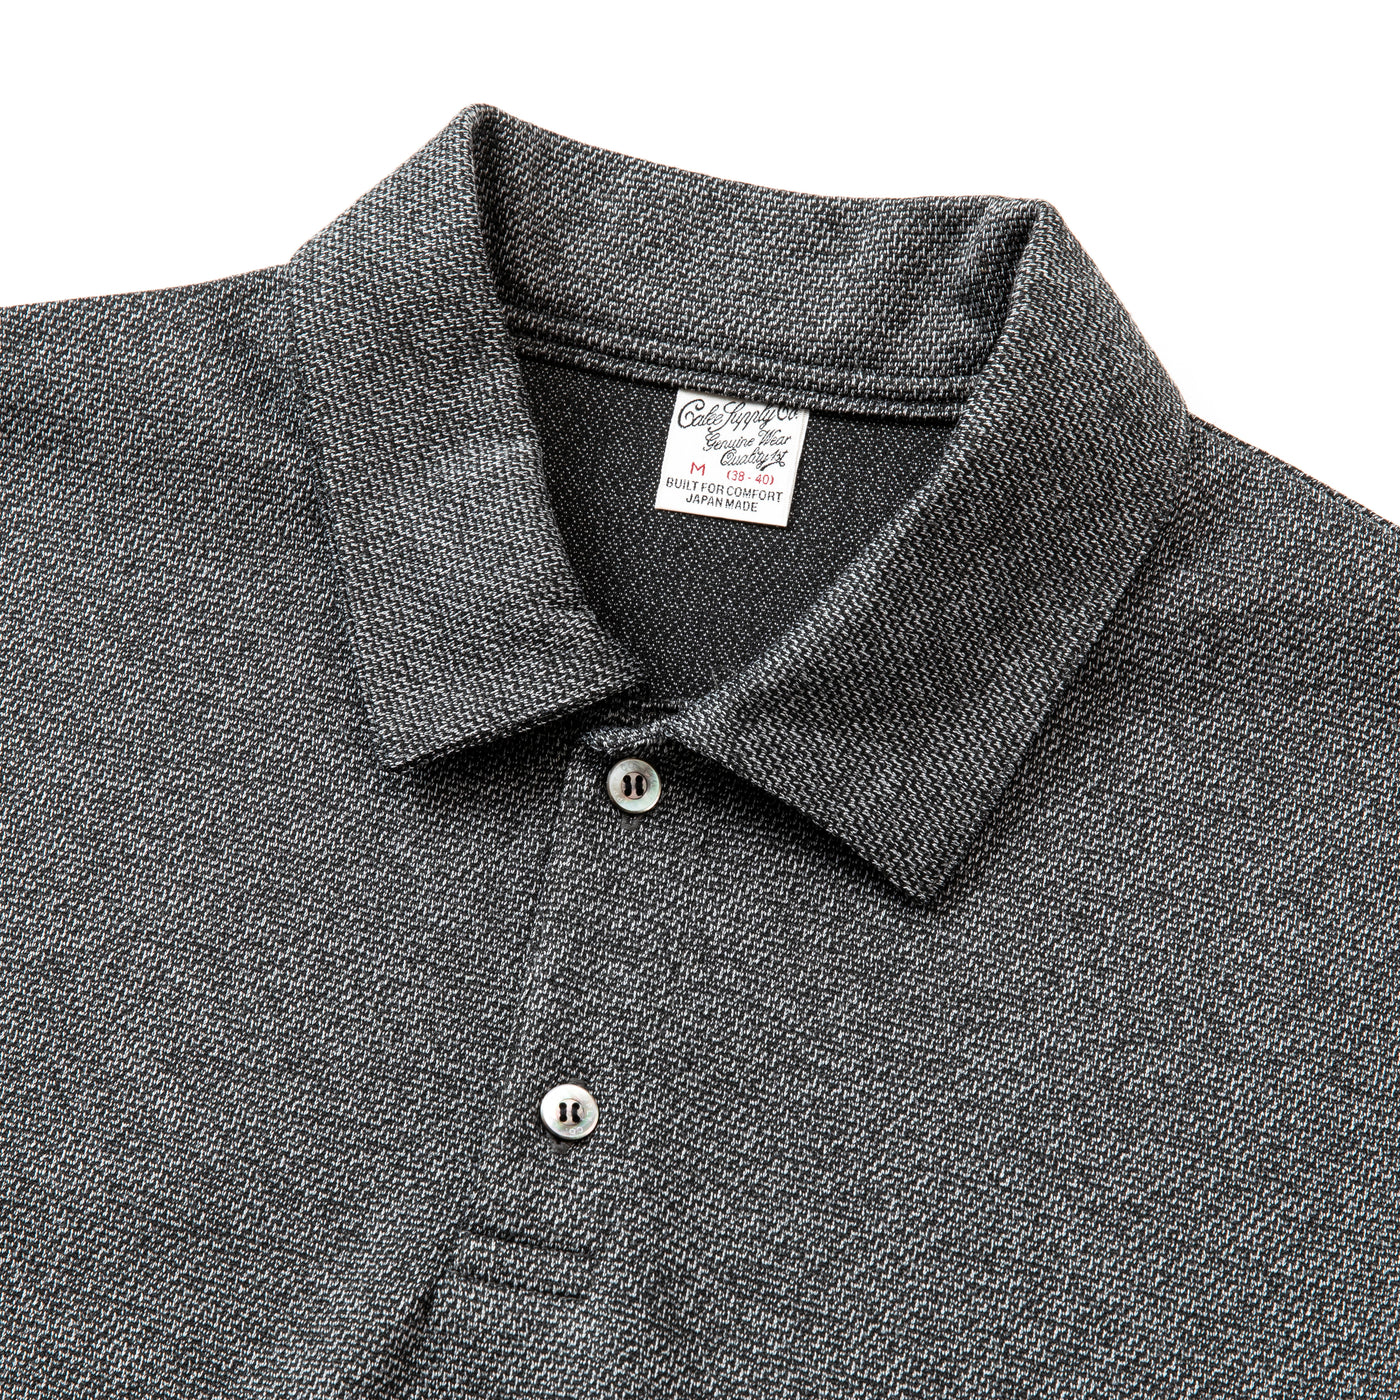 MIX TWEED JERSEY TYPE DROPSHOULDER POLO SHIRT